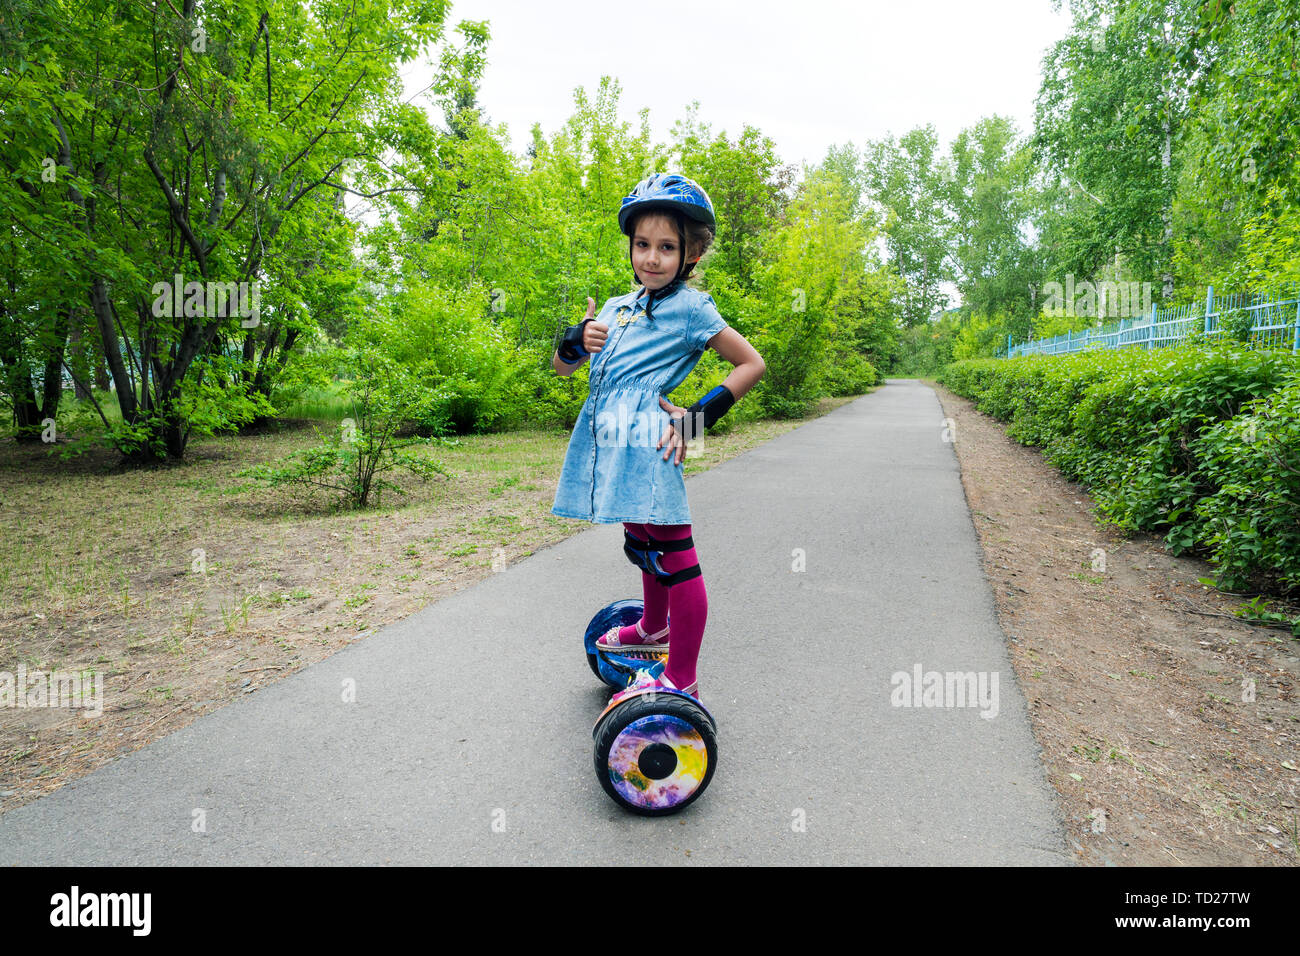 MINI SKATER ON A HOVERBOARD!